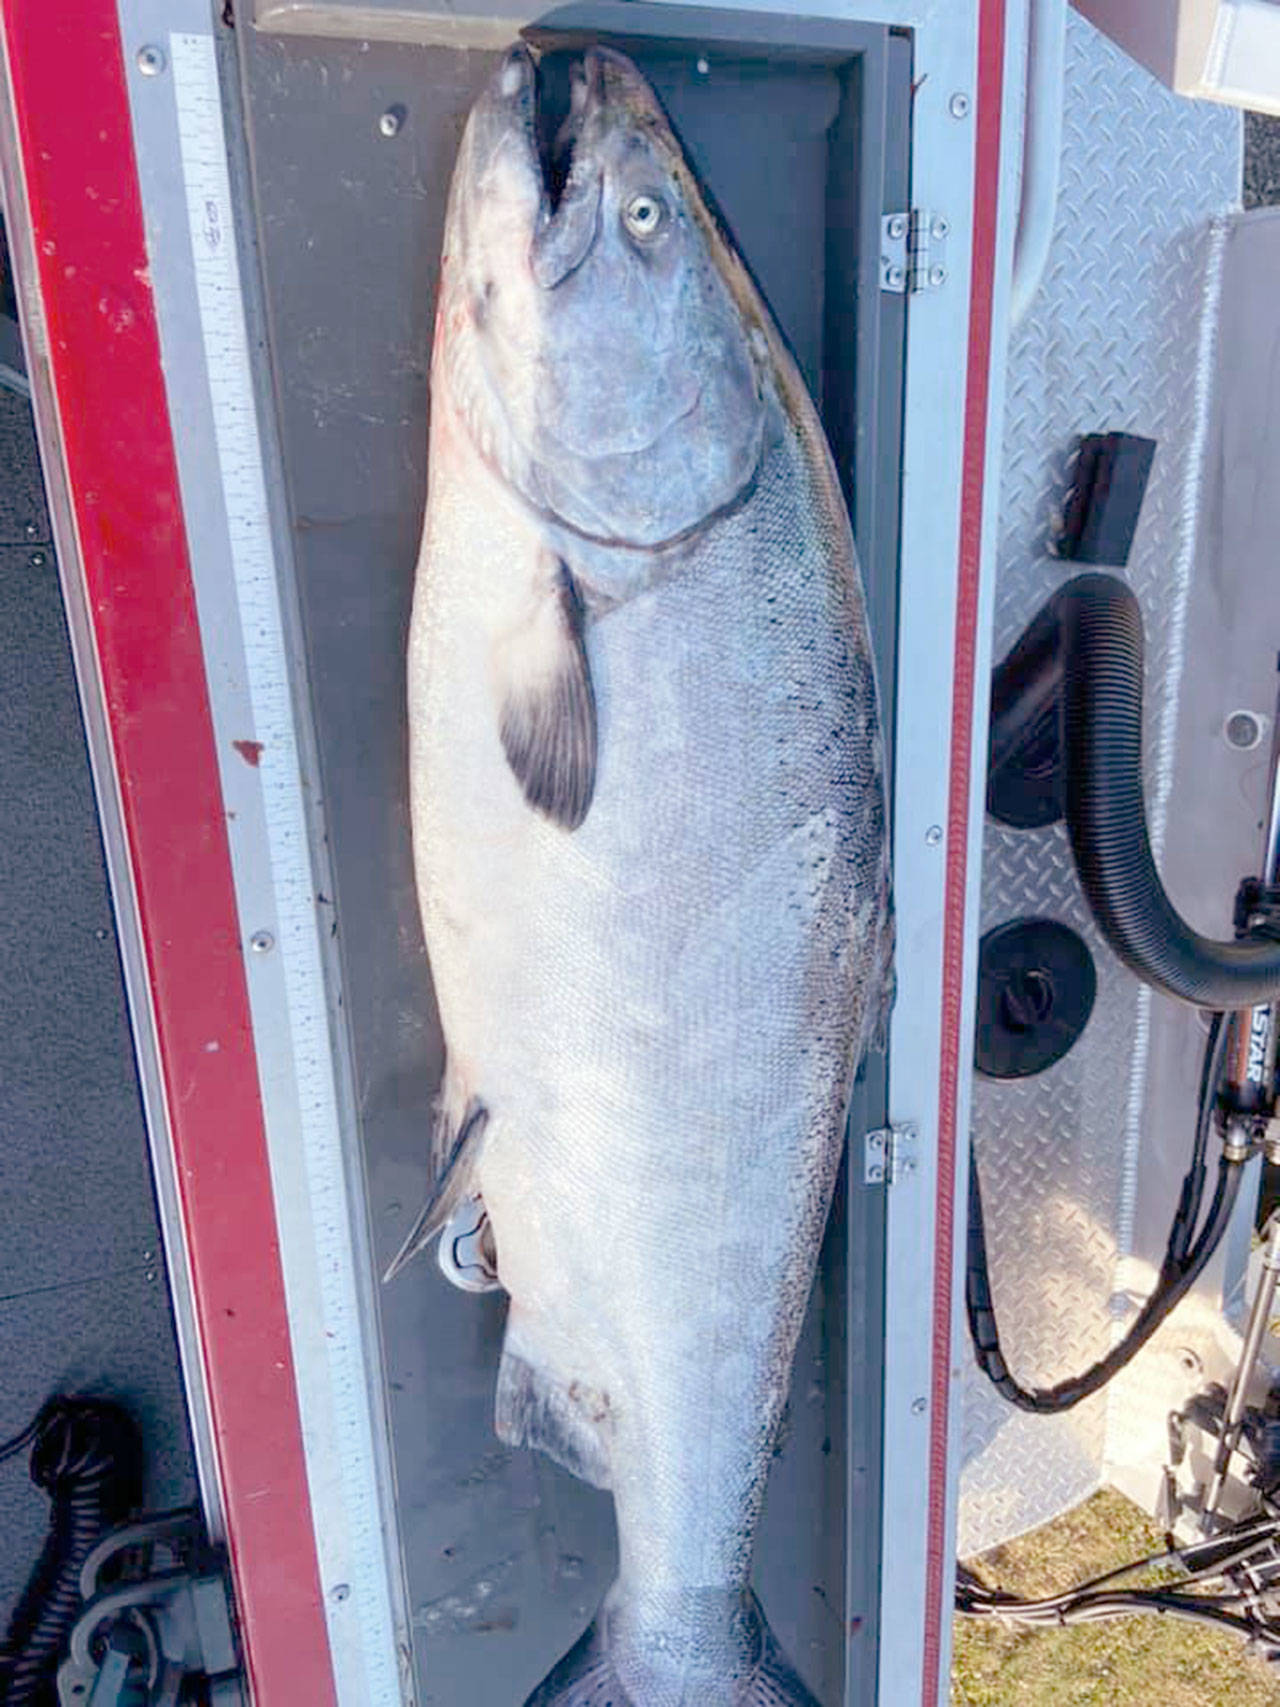 Port Angeles angler Bob Withrow caught this 36-pound chinook while fishing between Waadah Island and Mushroom Rock off Neah Bay in Marine Area 4 on Wednesday. (Submitted photo)